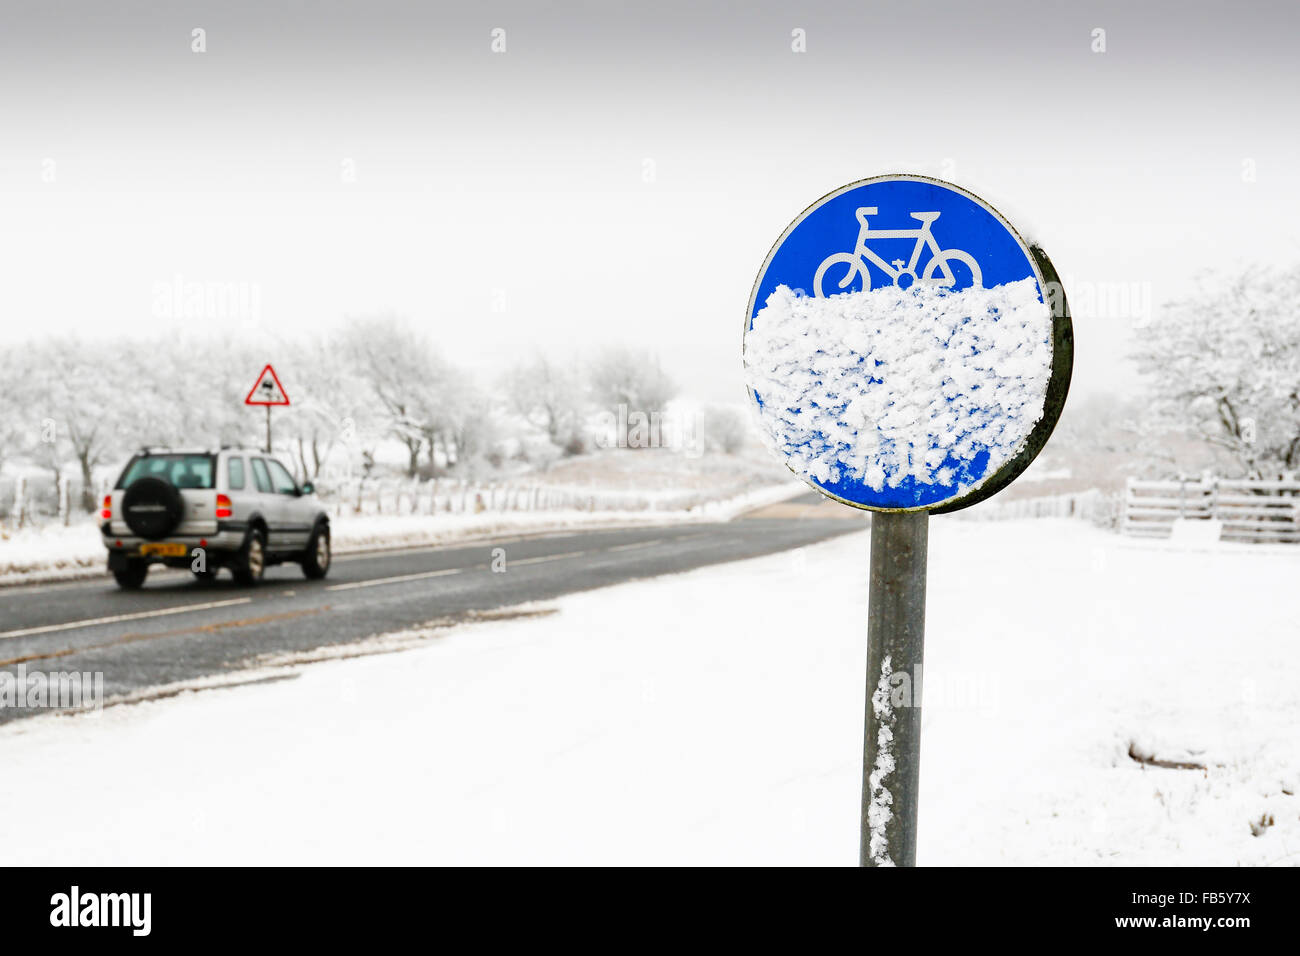 Vehicle driving on a country road in dangerous snowing conditions, with the cycle track covered in snow, Ayrshire, Scotland, UK Stock Photo